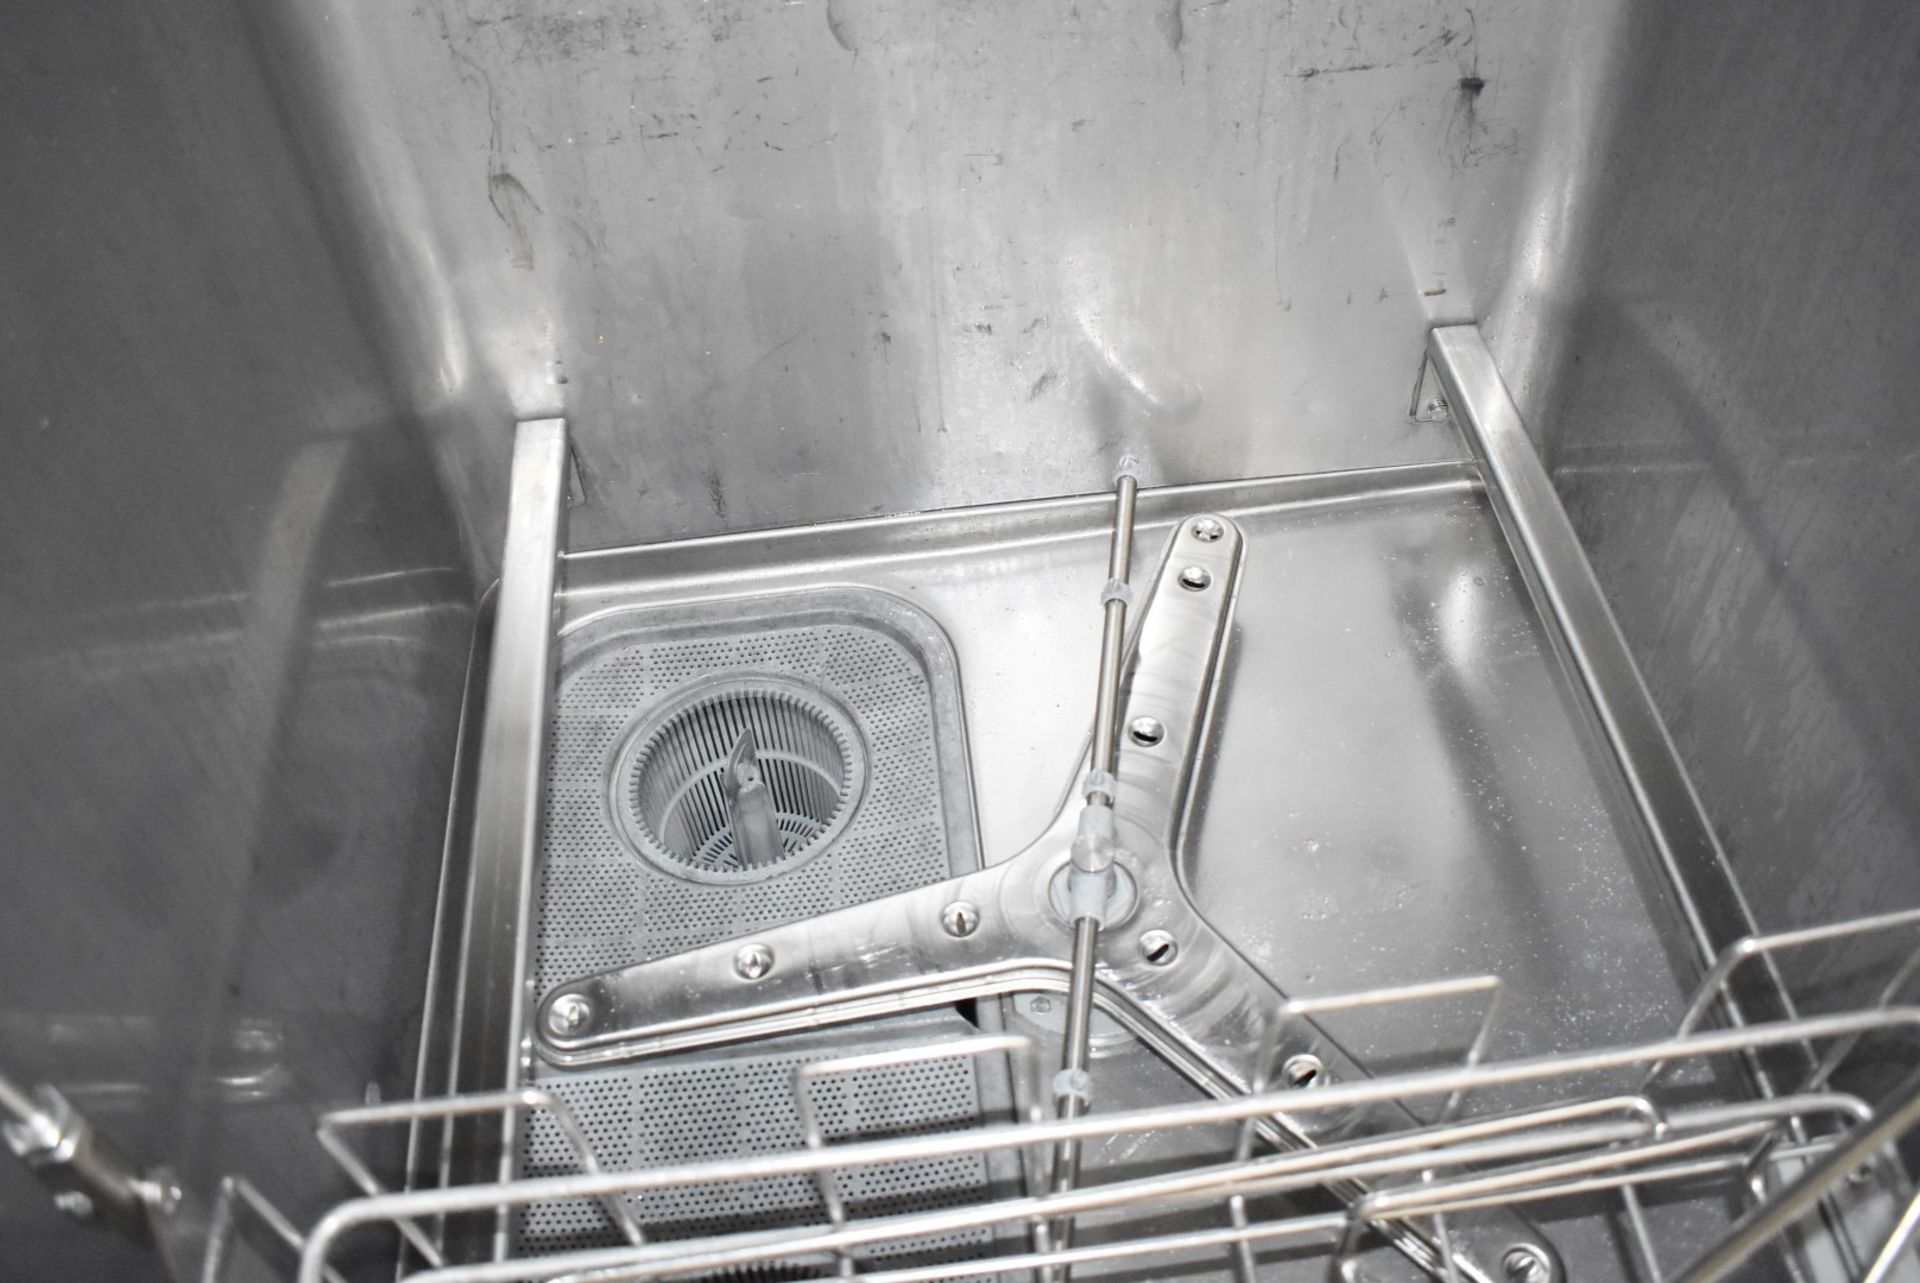 1 x Hobart Upright Heavy Duty Dishwasher For Oven Trays / Cooking Pans - 3 Phase - RRP £17,000! - Image 10 of 14